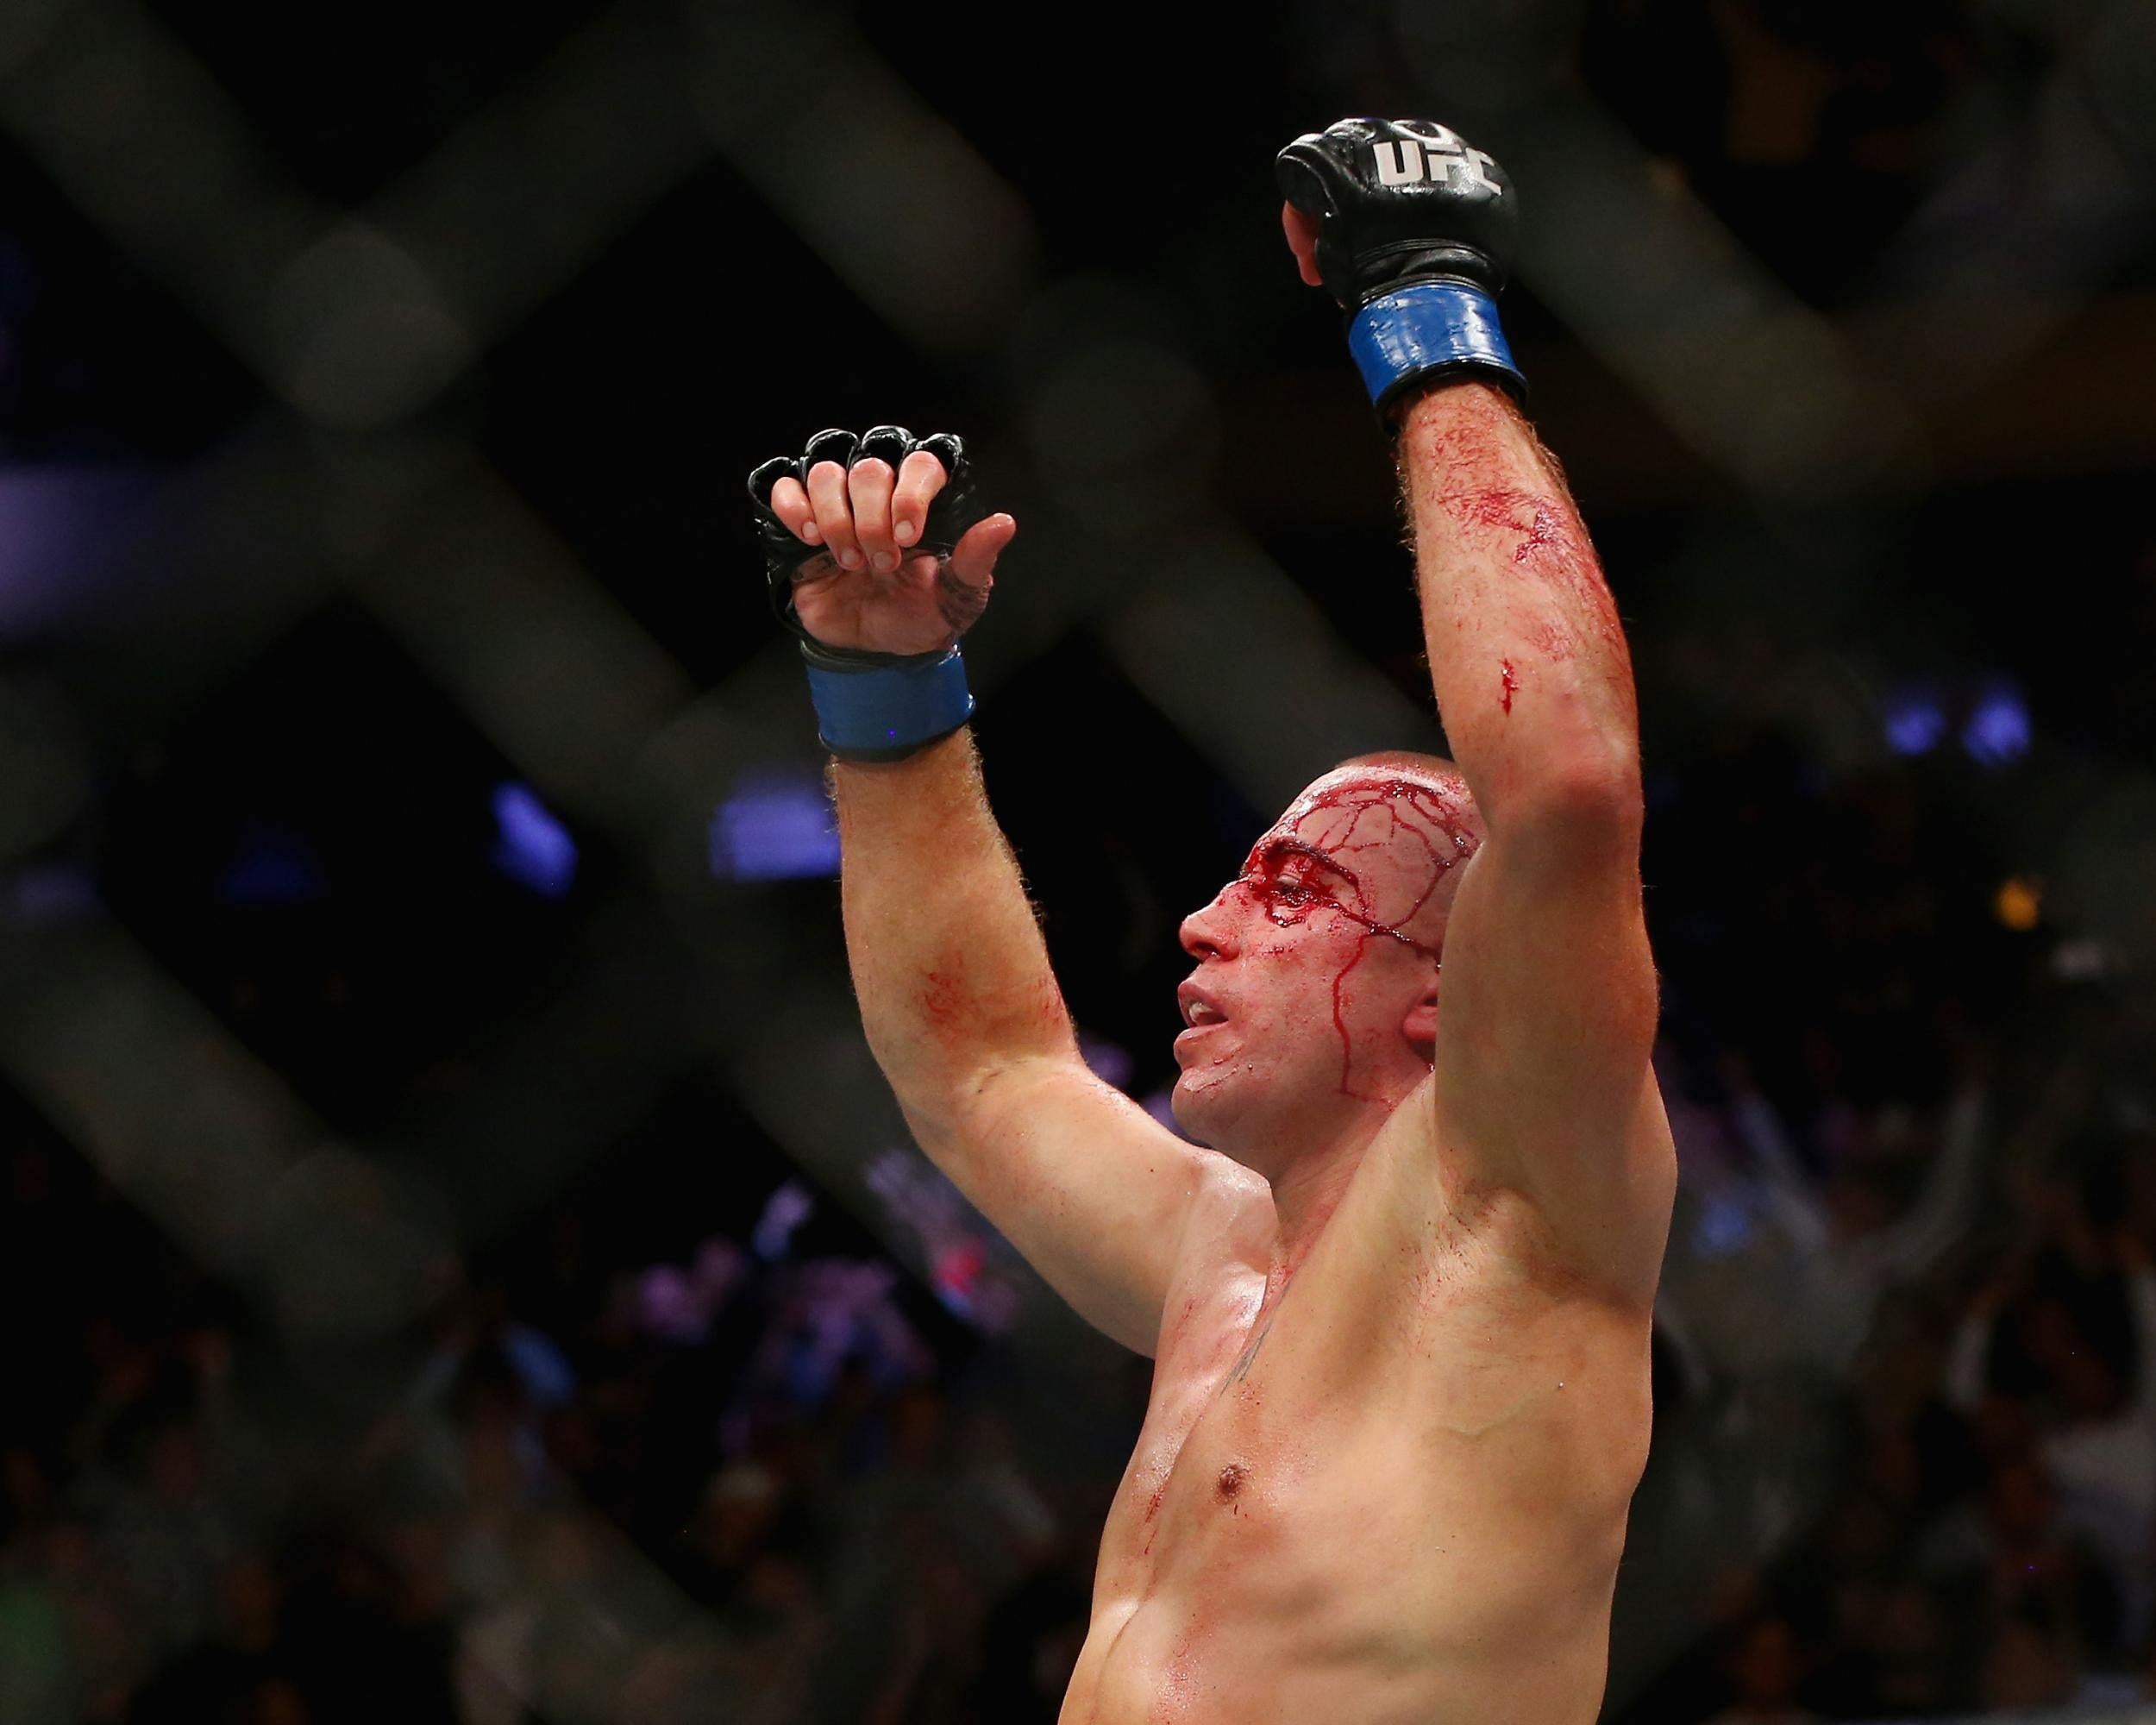 St-Pierre returned after four years out of the UFC